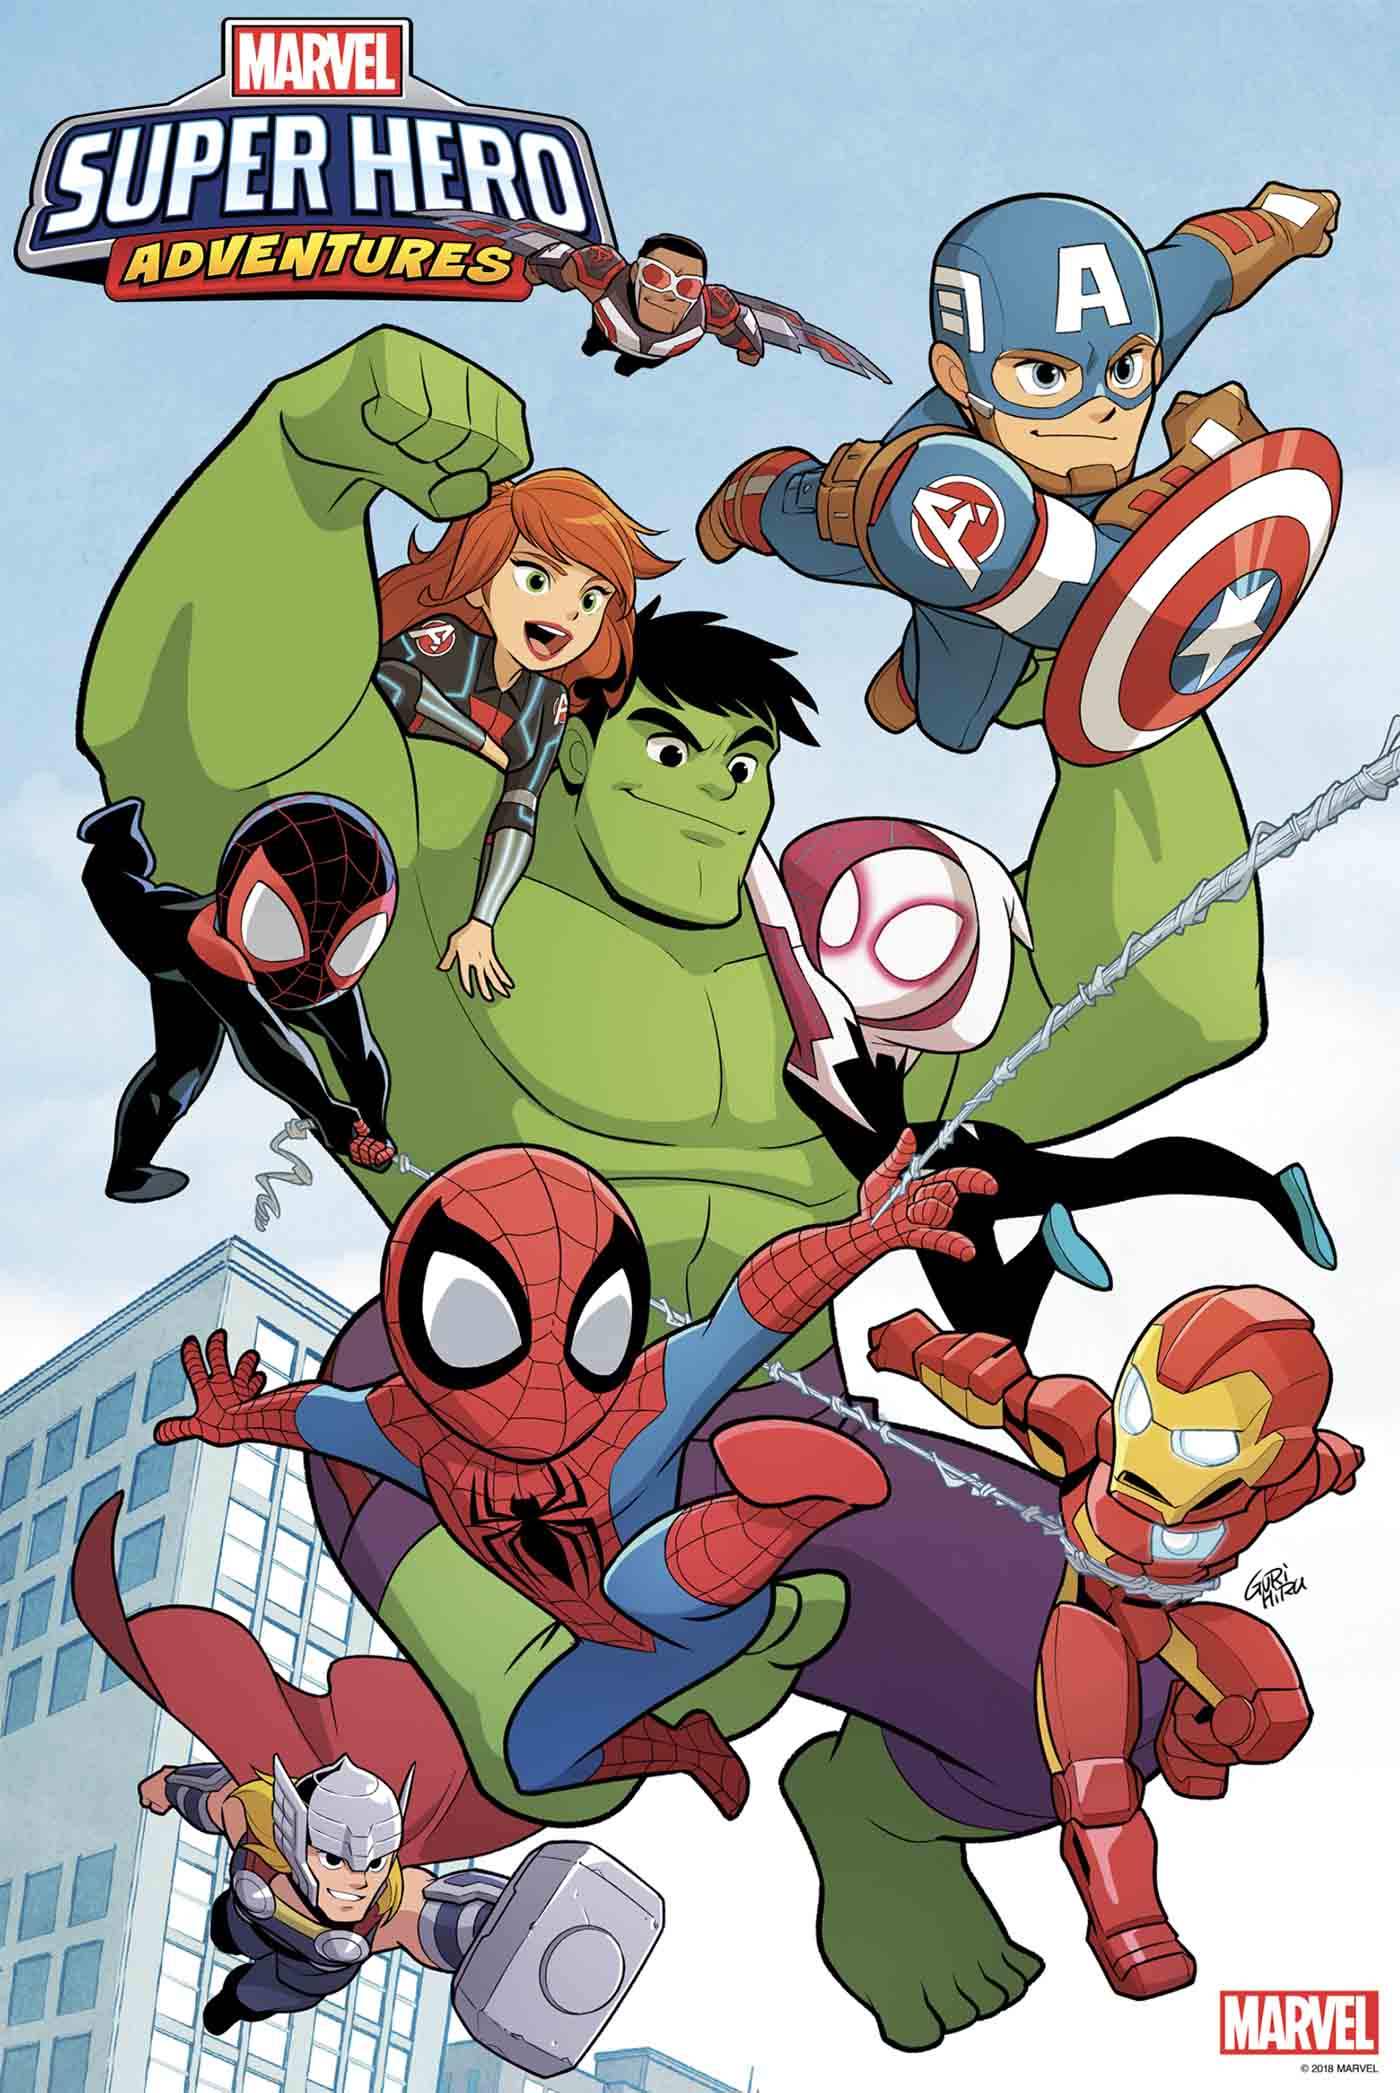 New all-ages comic series 'Marvel Super Hero Adventures' coming this spring